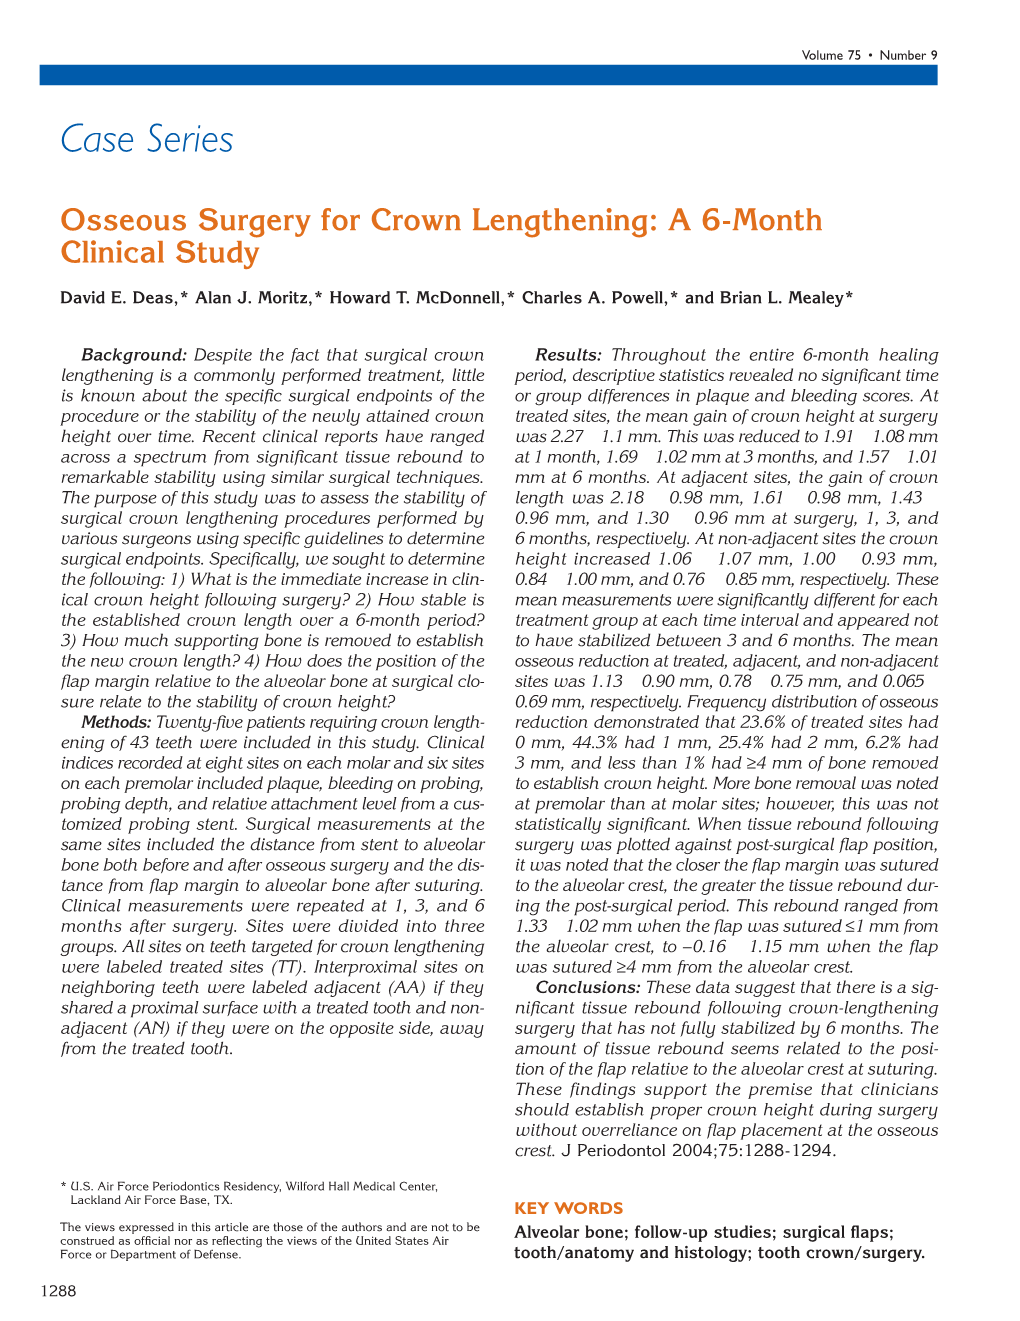 Osseous Surgery for Crown Lengthening: a 6-Month Clinical Study